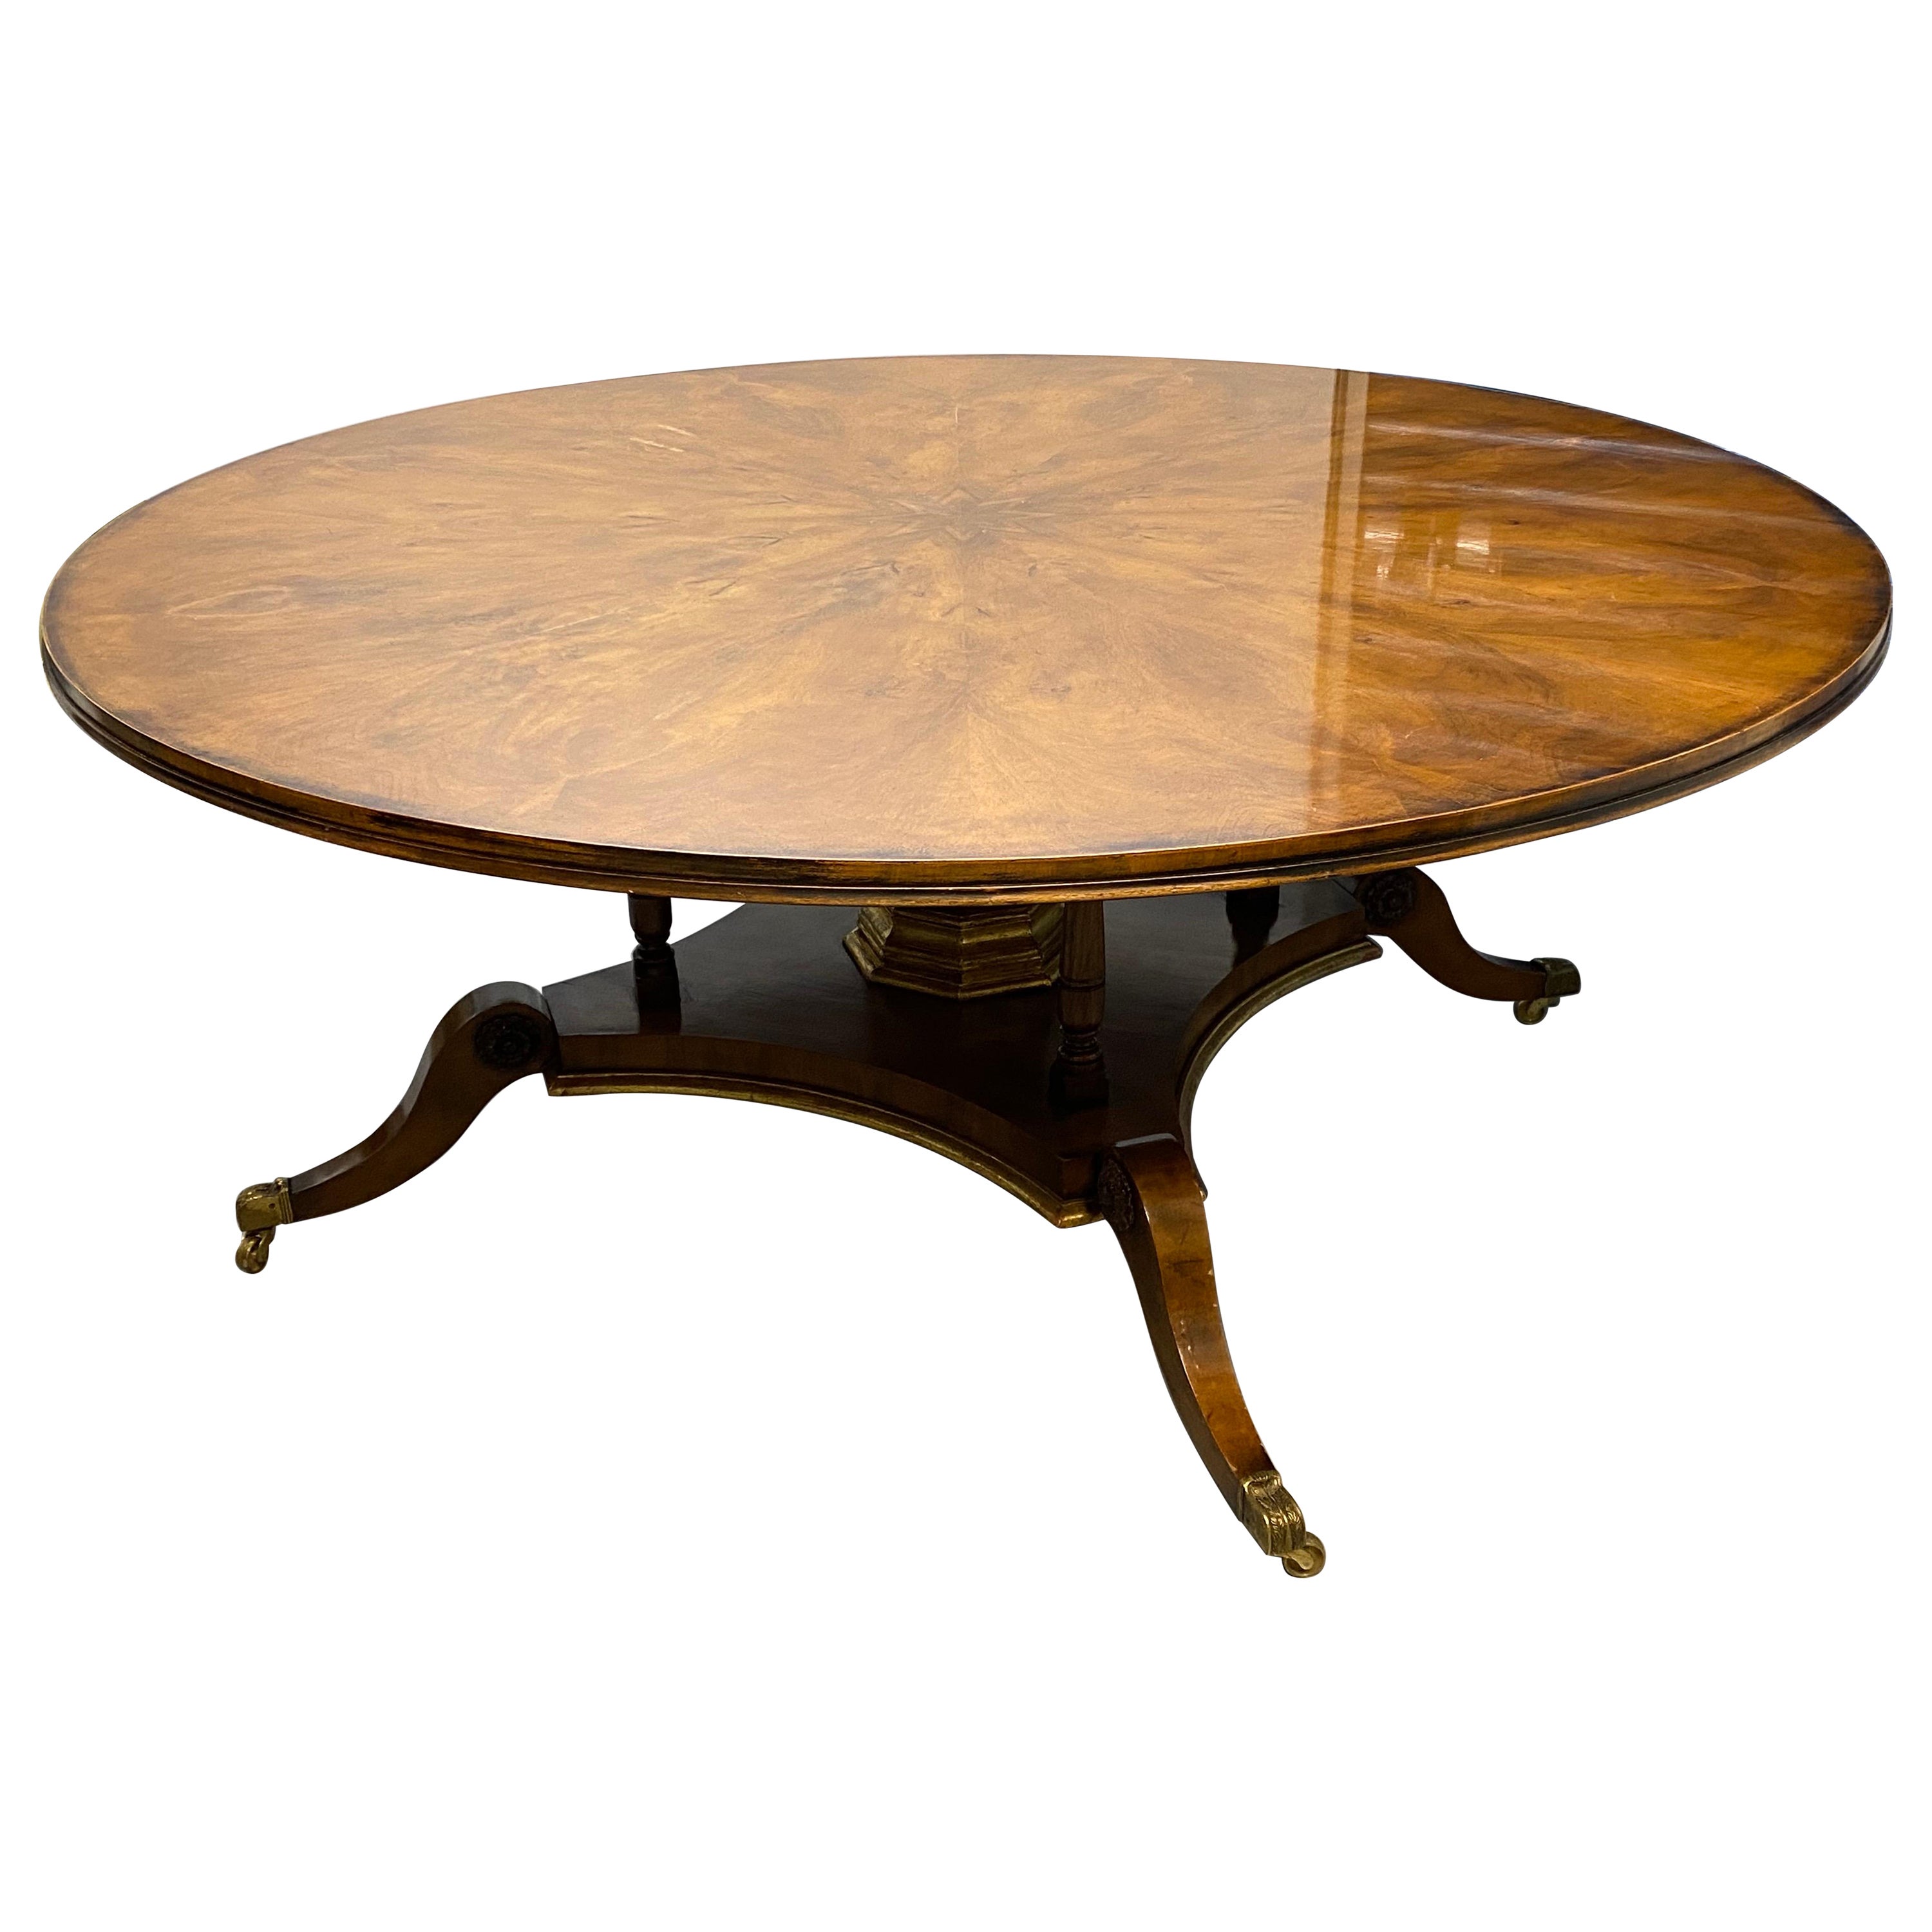 Georgian Style Large Round Starburst Matched Pedestal Table For Sale